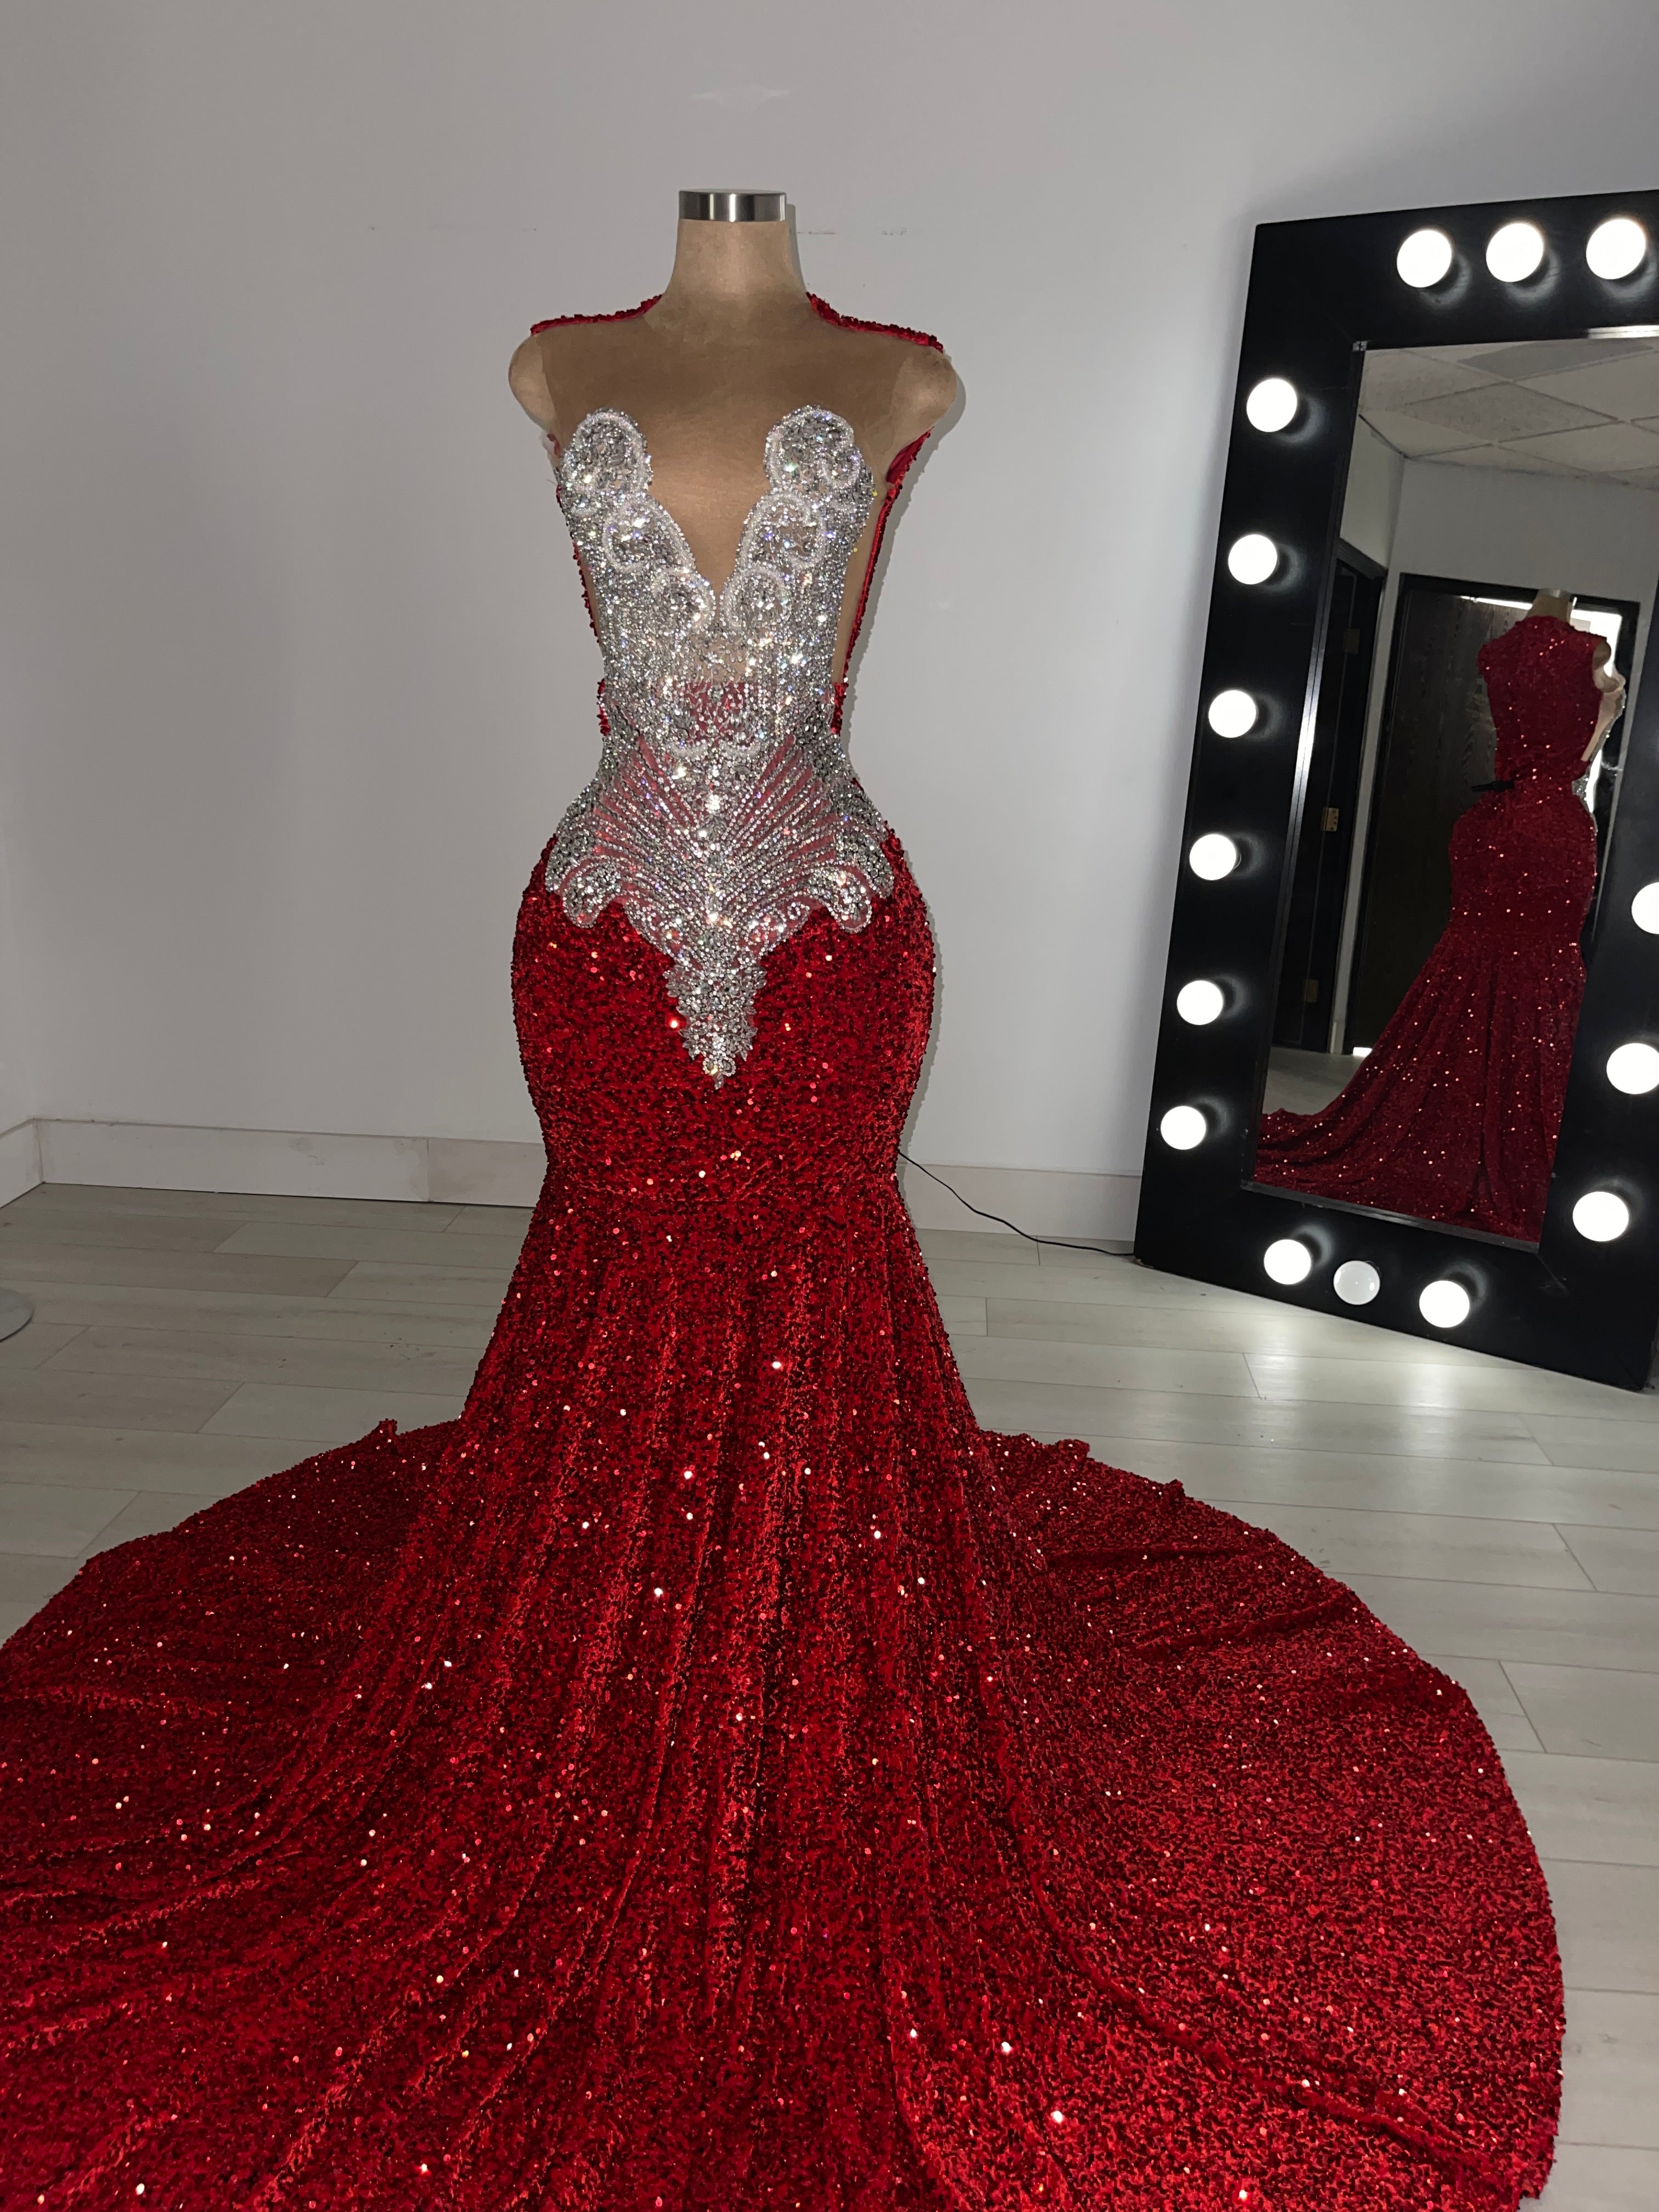 Red Sequin Prom Dress with Silver Rhinestones